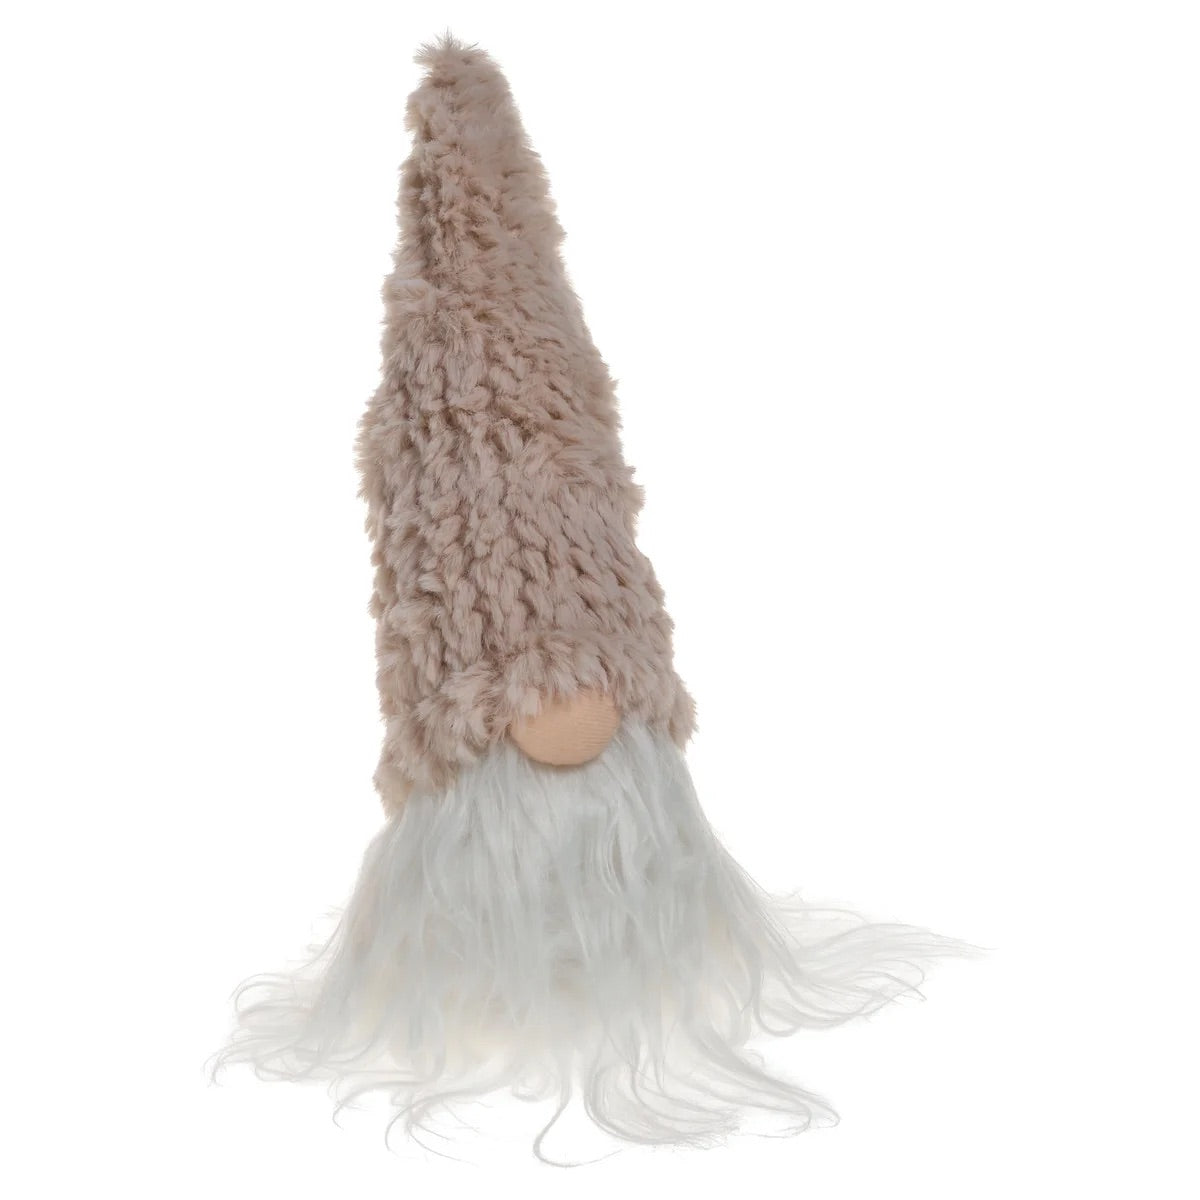 GNOME, HEAD W/KNITTED HAT - BEIGE